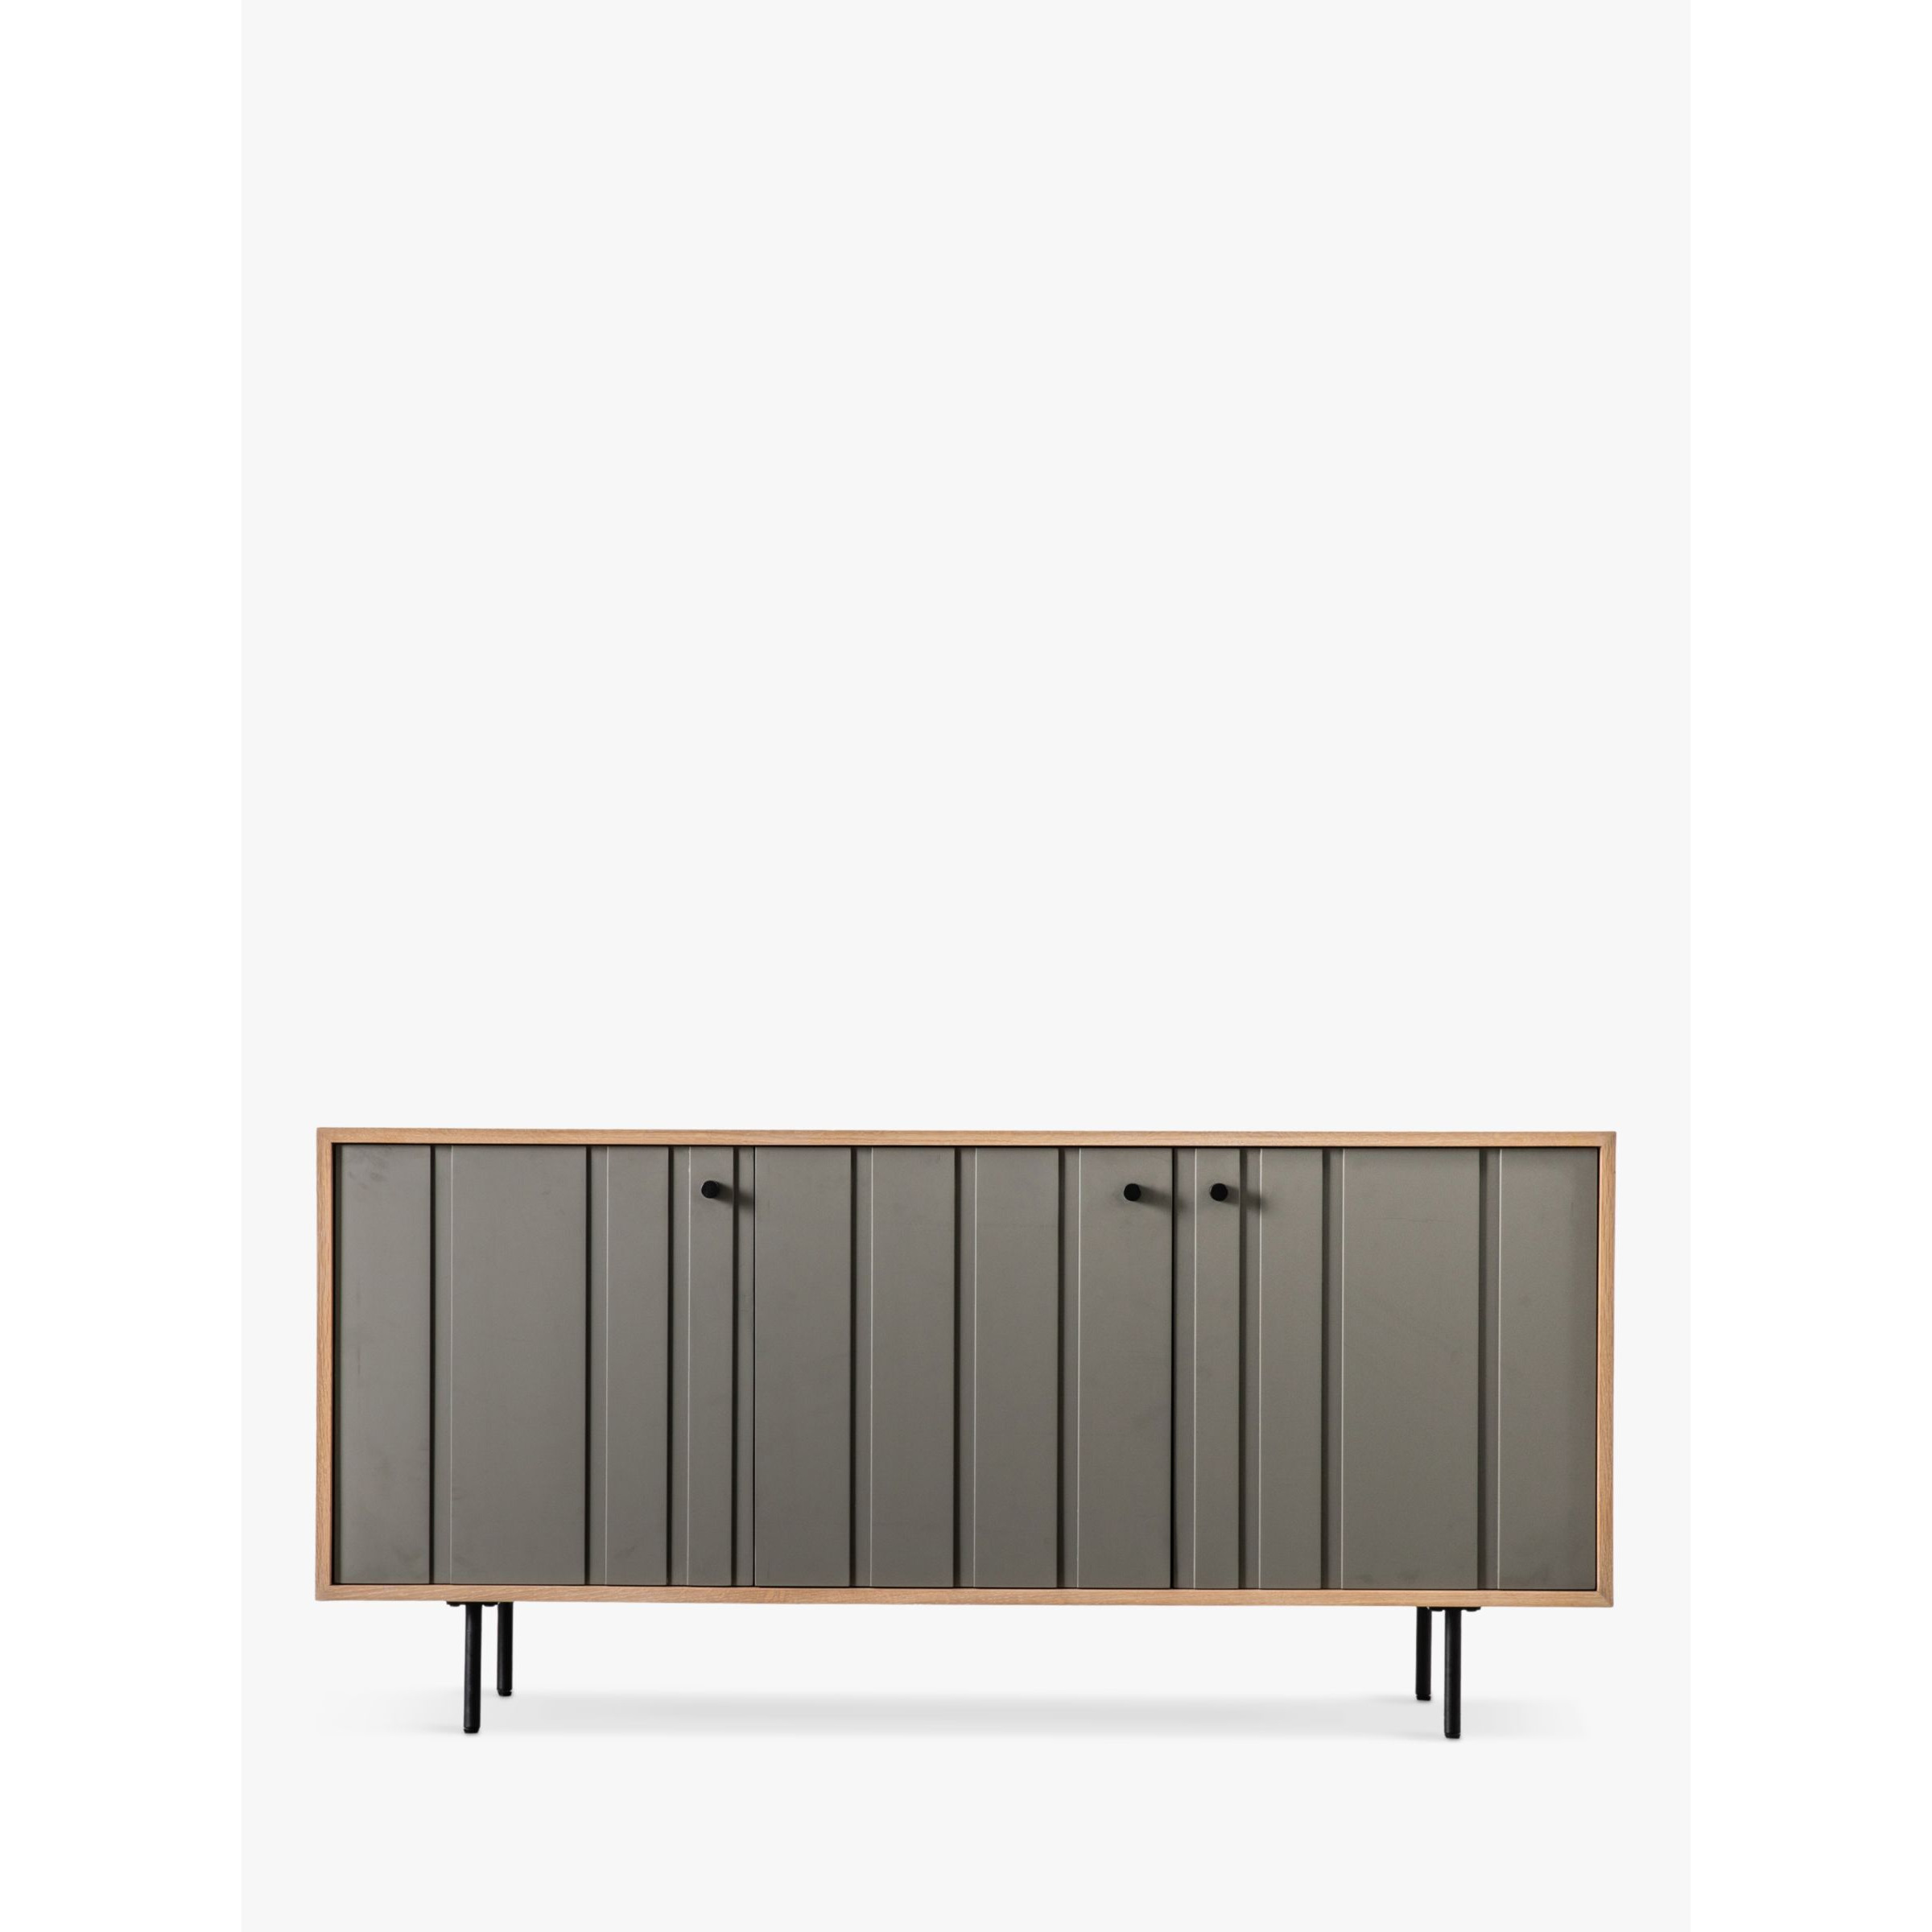 Gallery Direct Bexwell Sideboard, Natural/Grey - image 1